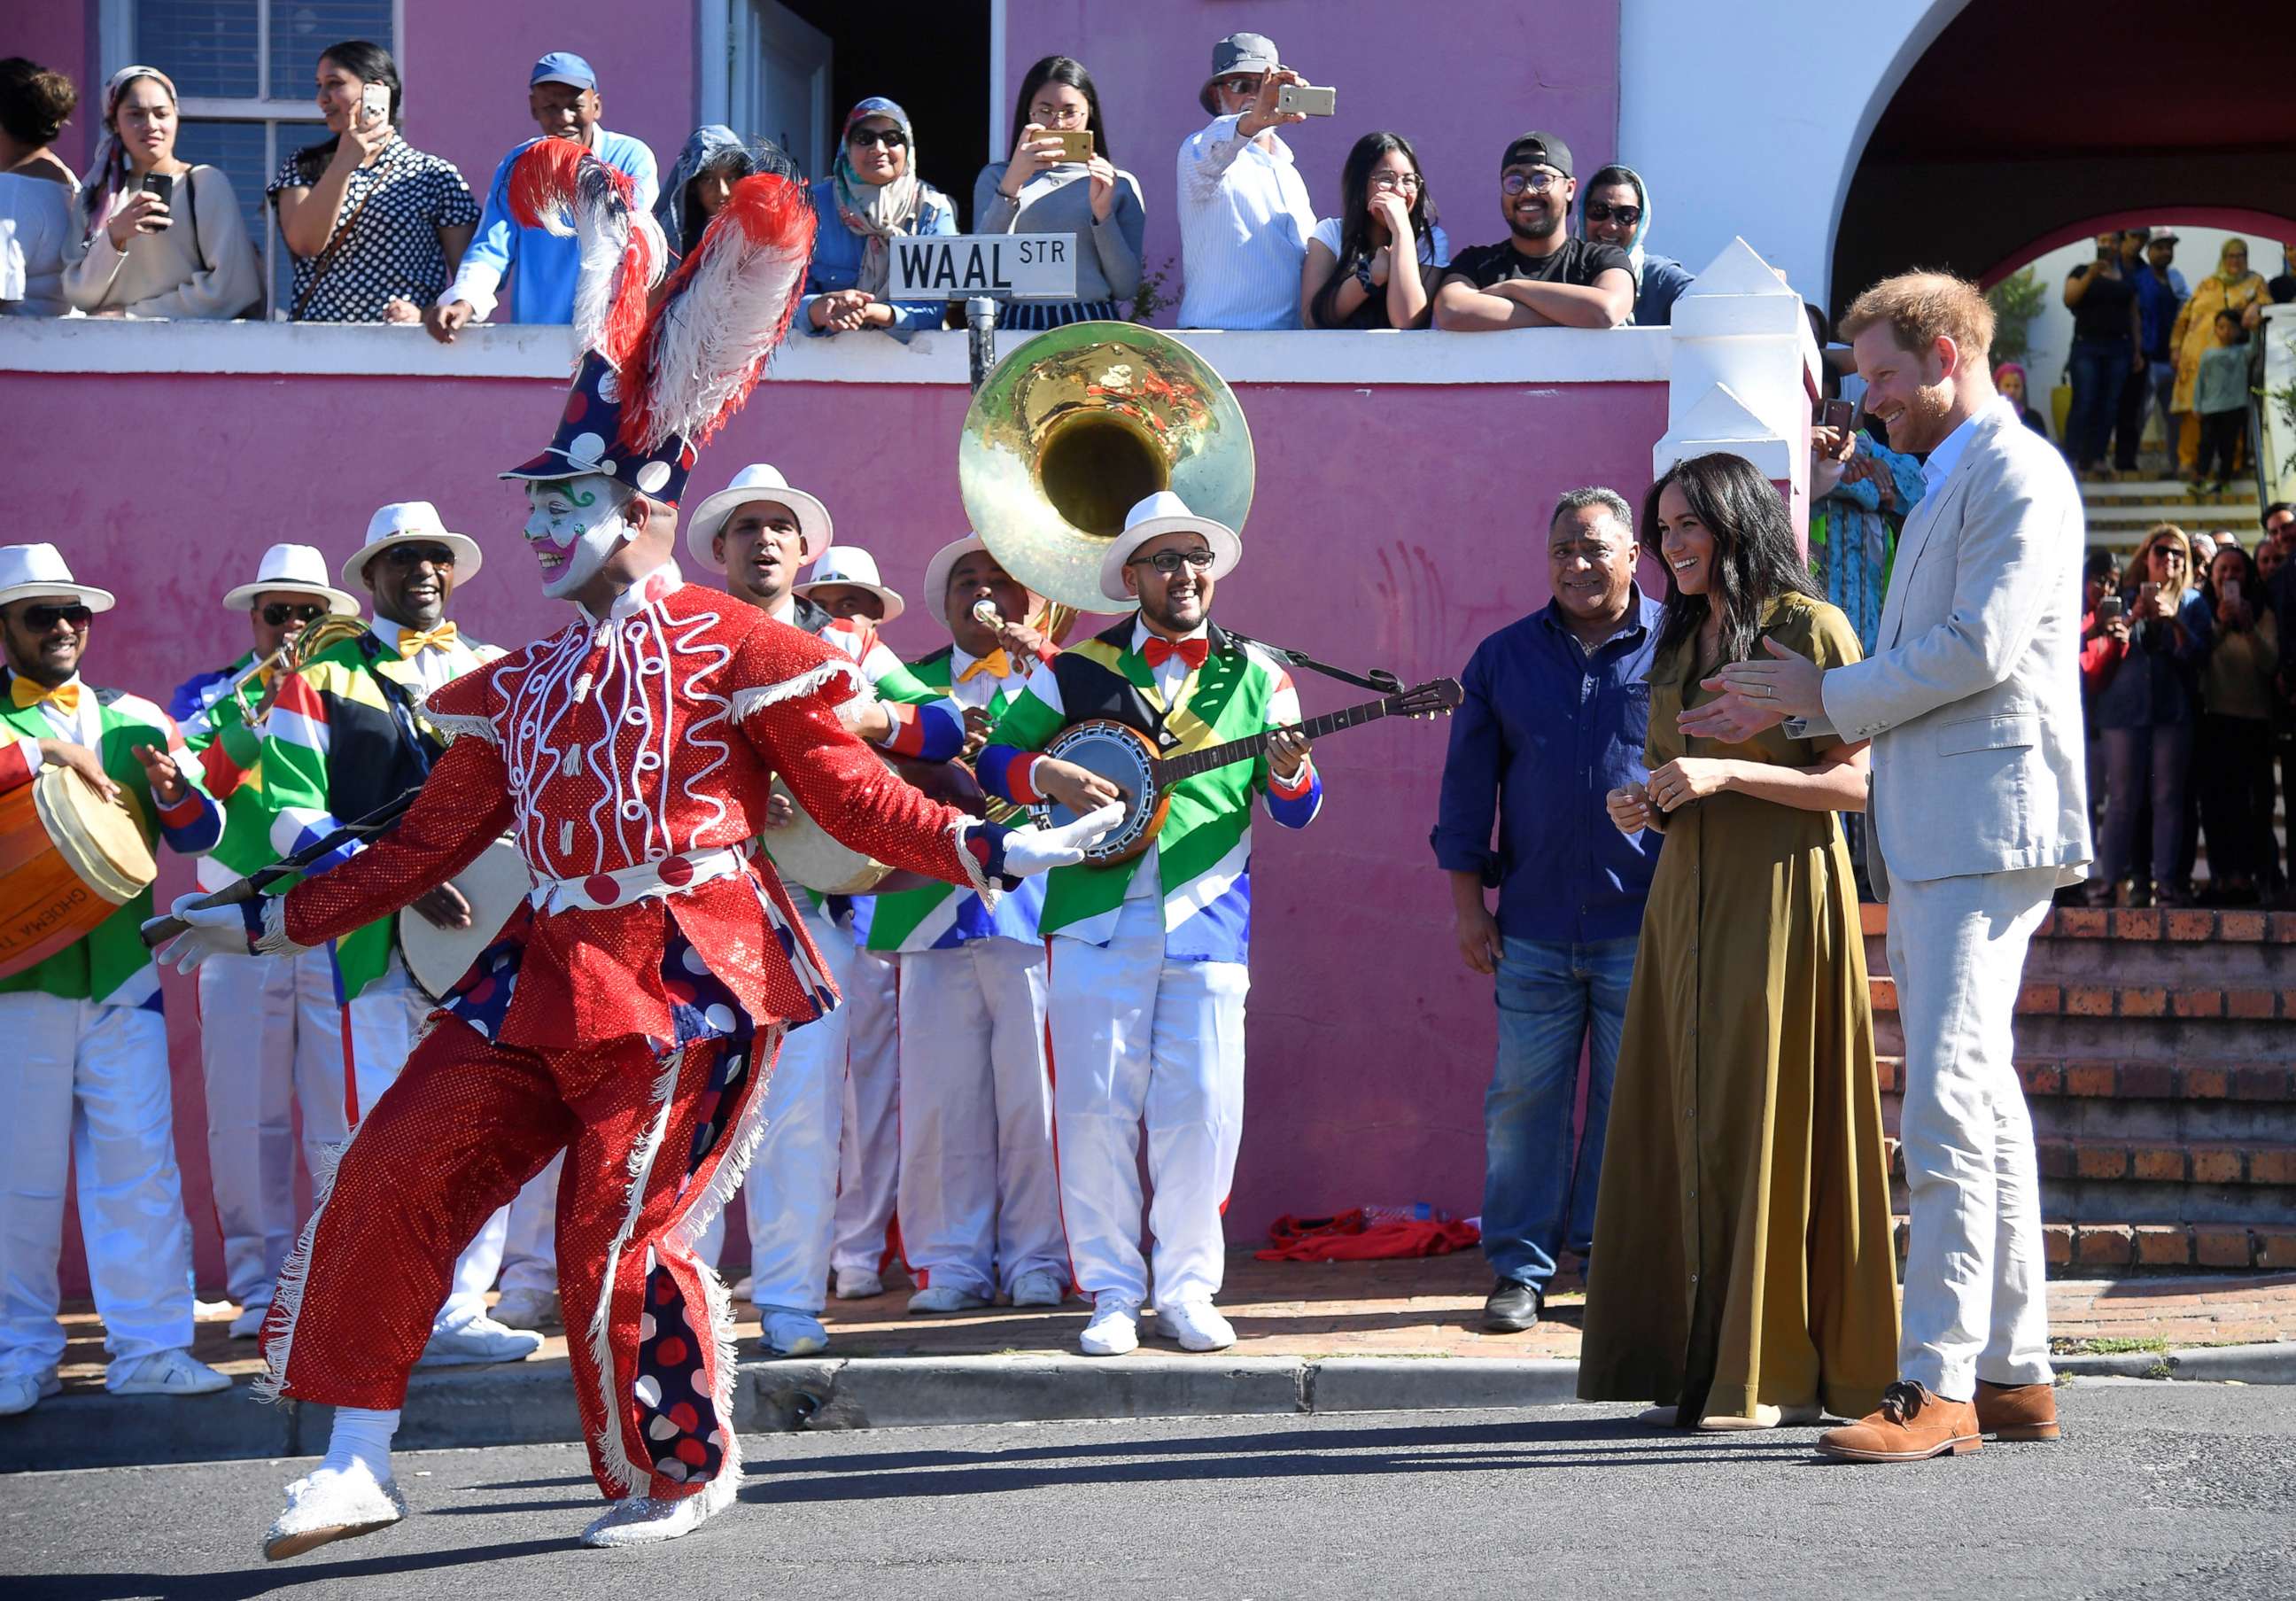 PHOTO: The Duke and Duchess of Sussex, Prince Harry and his wife Meghan, take part in Heritage Day public holiday celebrations in the Bo Kaap district of Cape Town, South Africa, September 24, 2019.